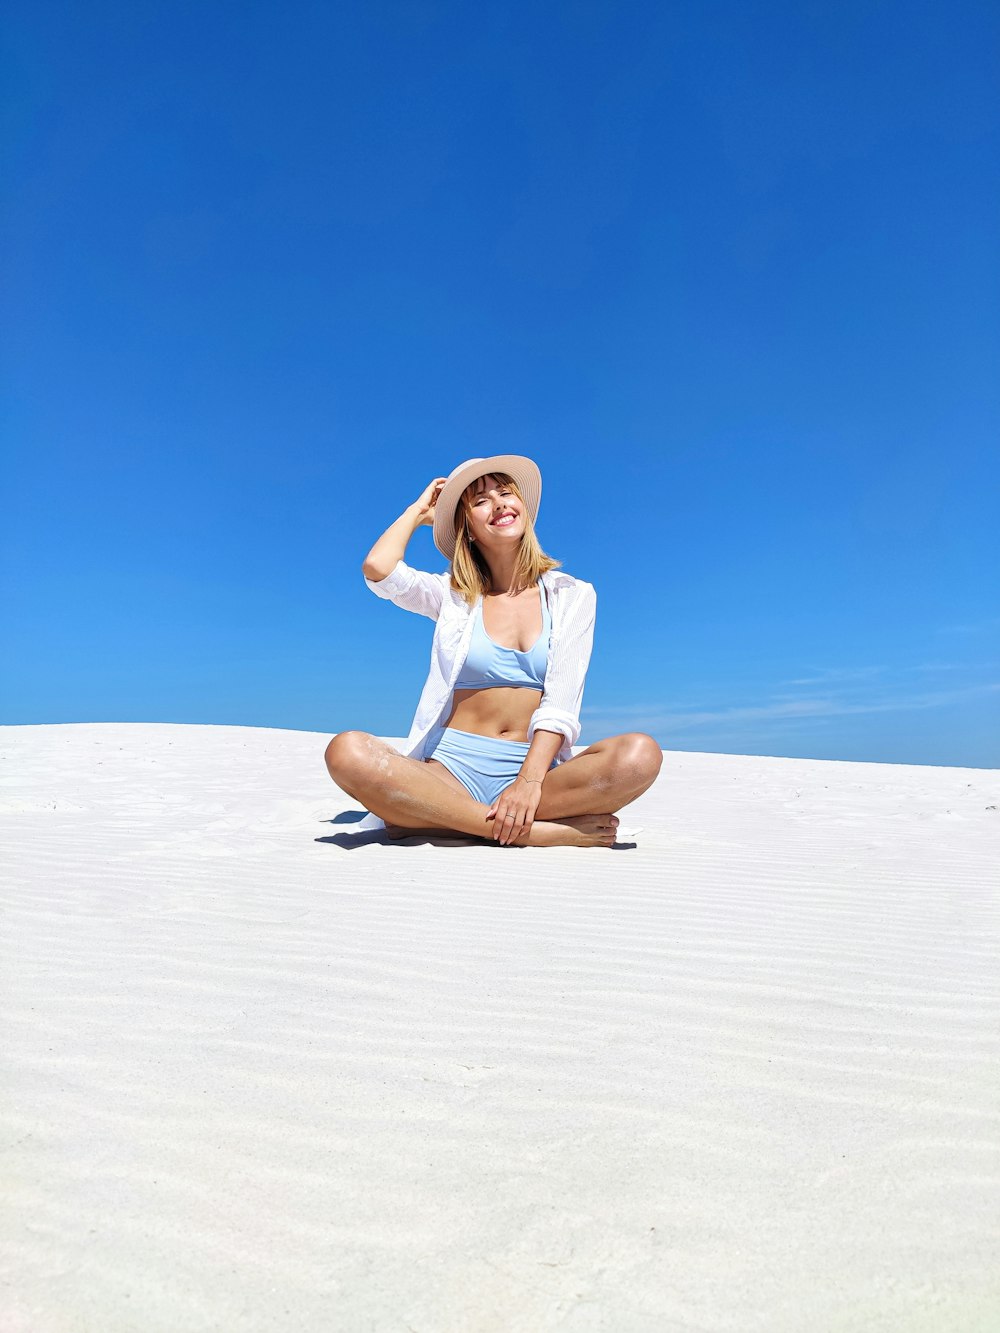 woman in white dress sitting on sand during daytime